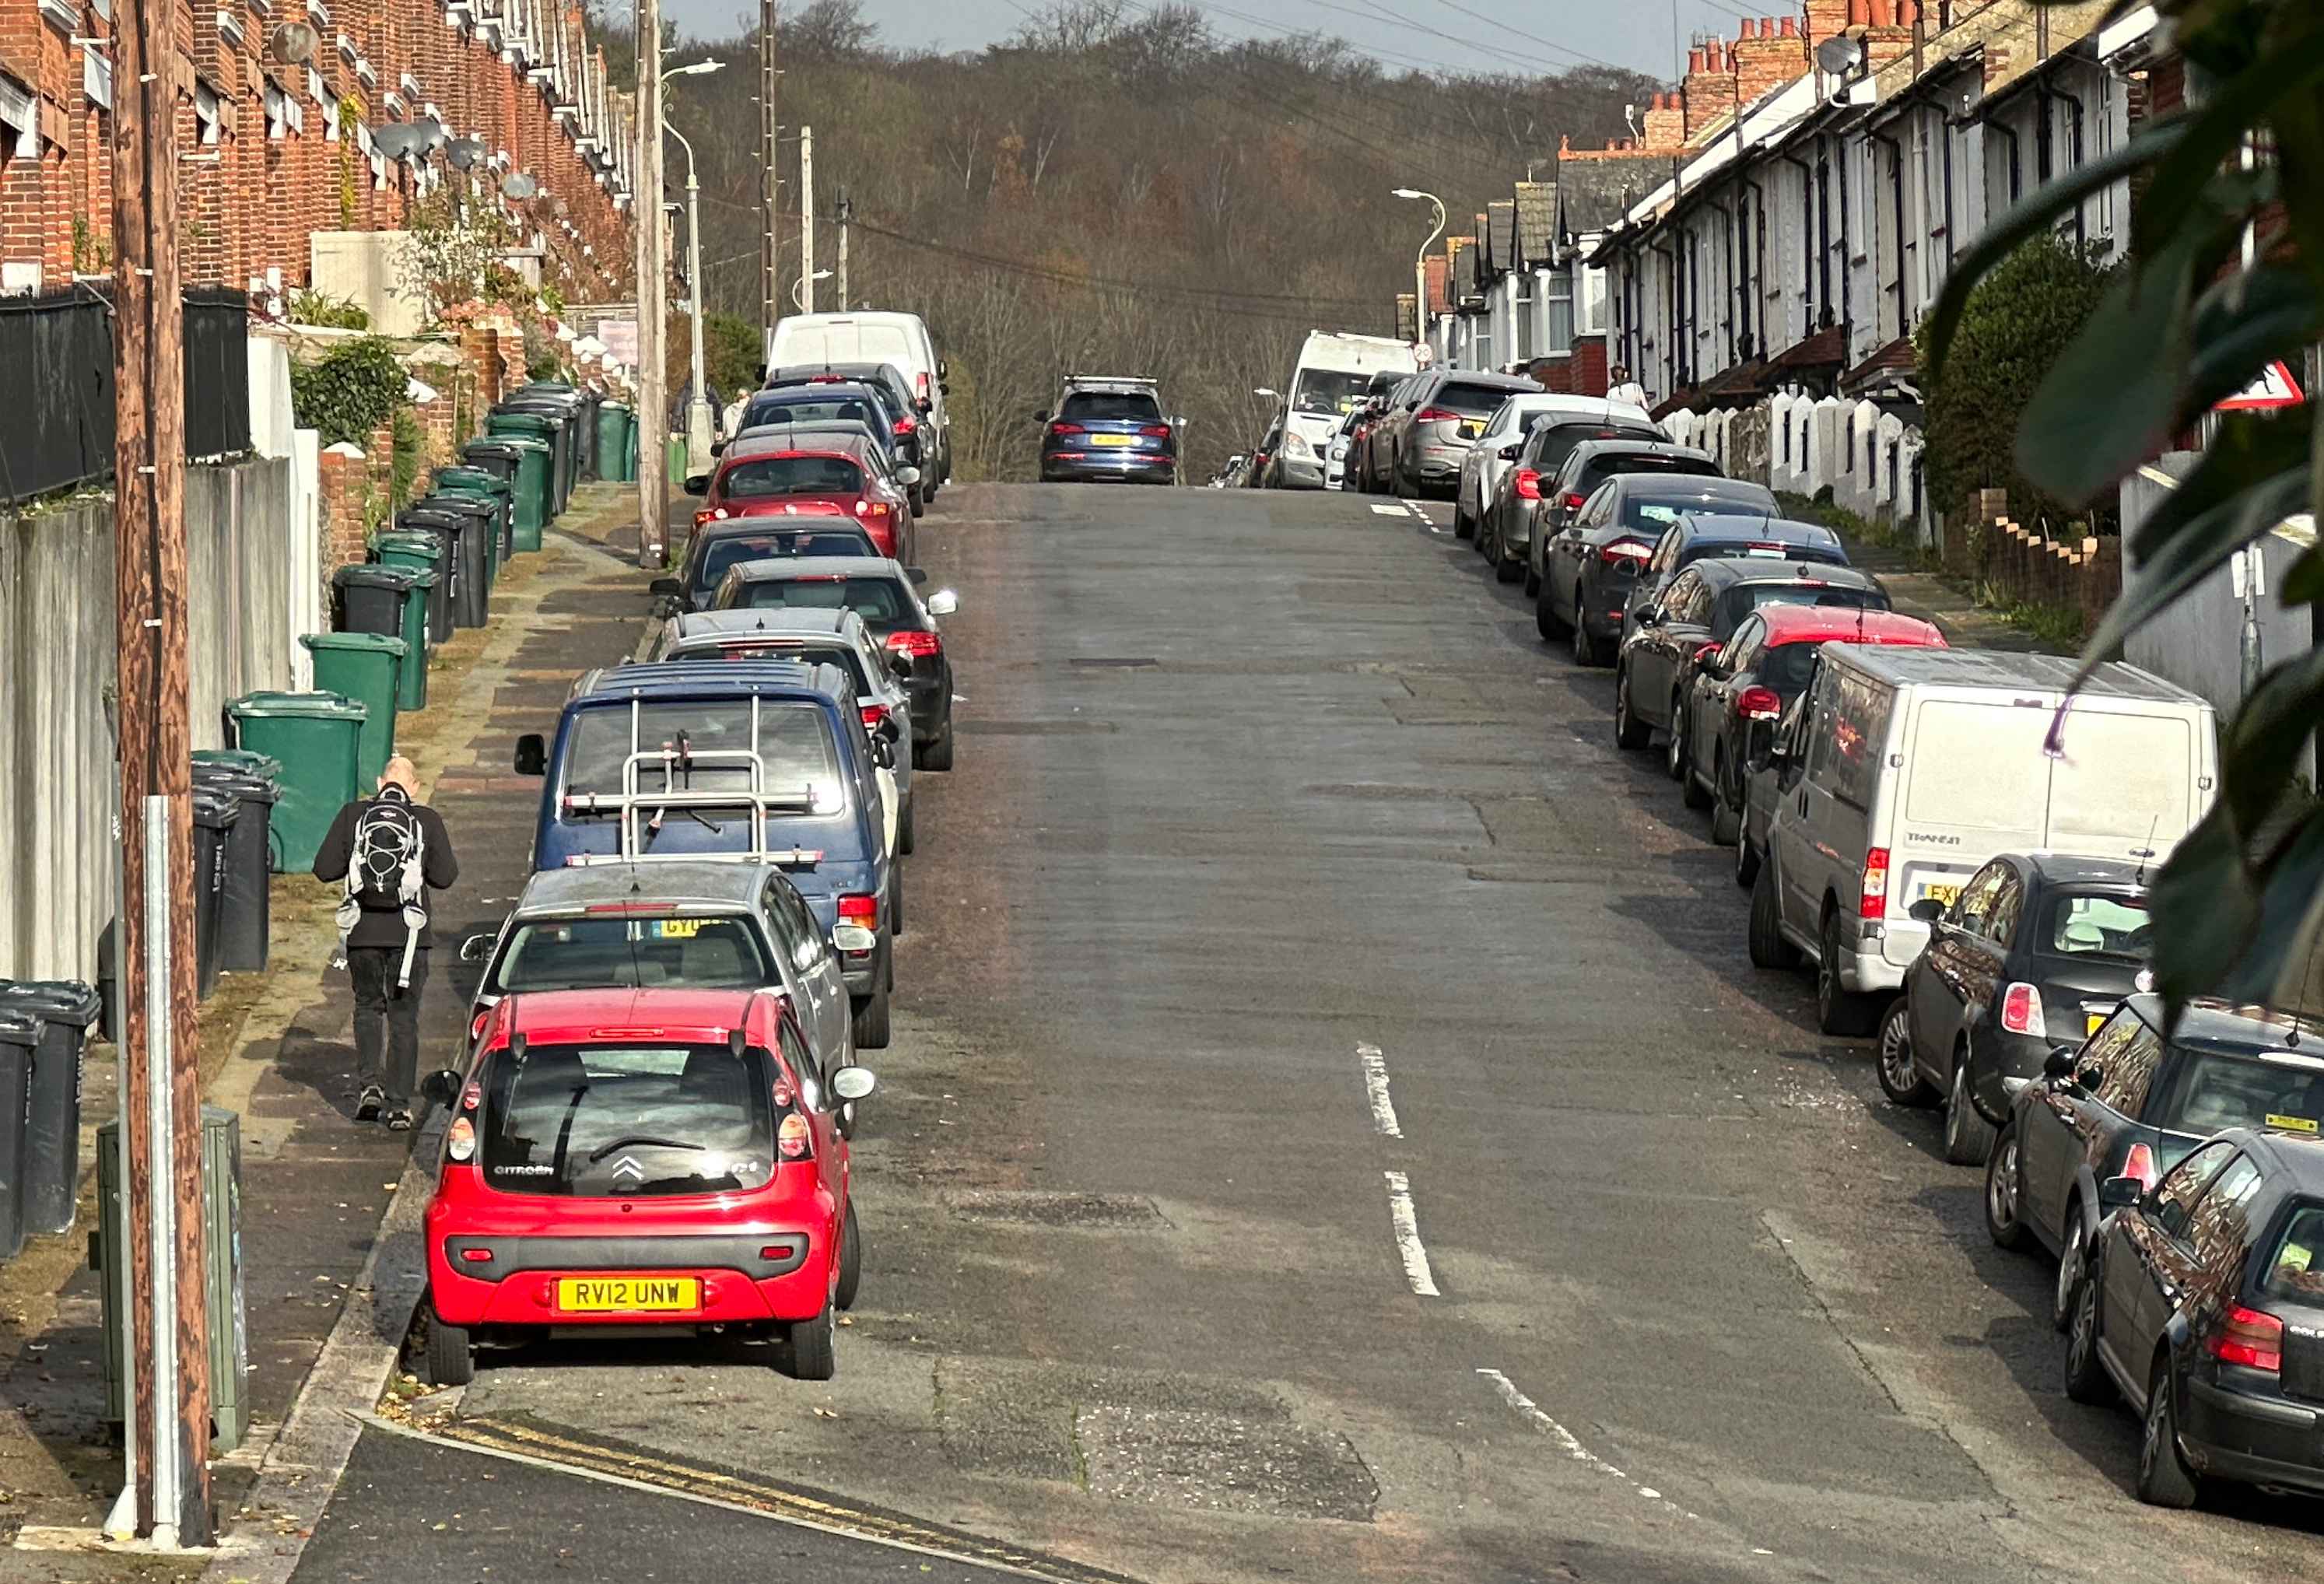 Photograph of RV12 UNW - a Red Citroen C1 parked in Hollingdean by a non-resident. The second of four photographs supplied by the residents of Hollingdean.